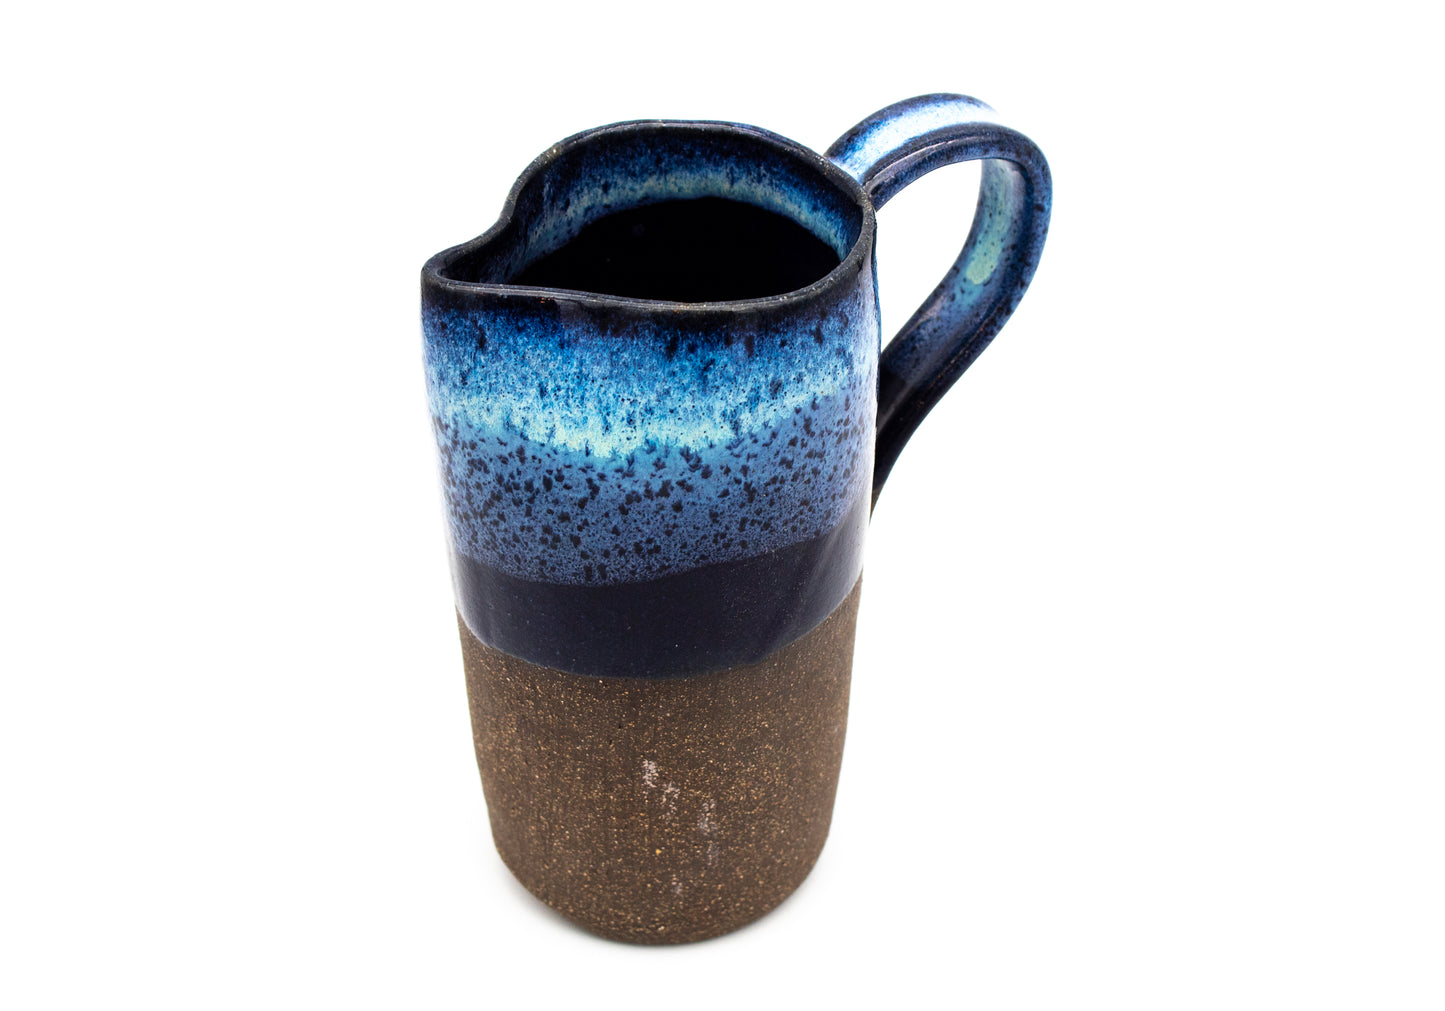 Handled Pitcher with Shades of Blue on Dark Brown Bared Clay